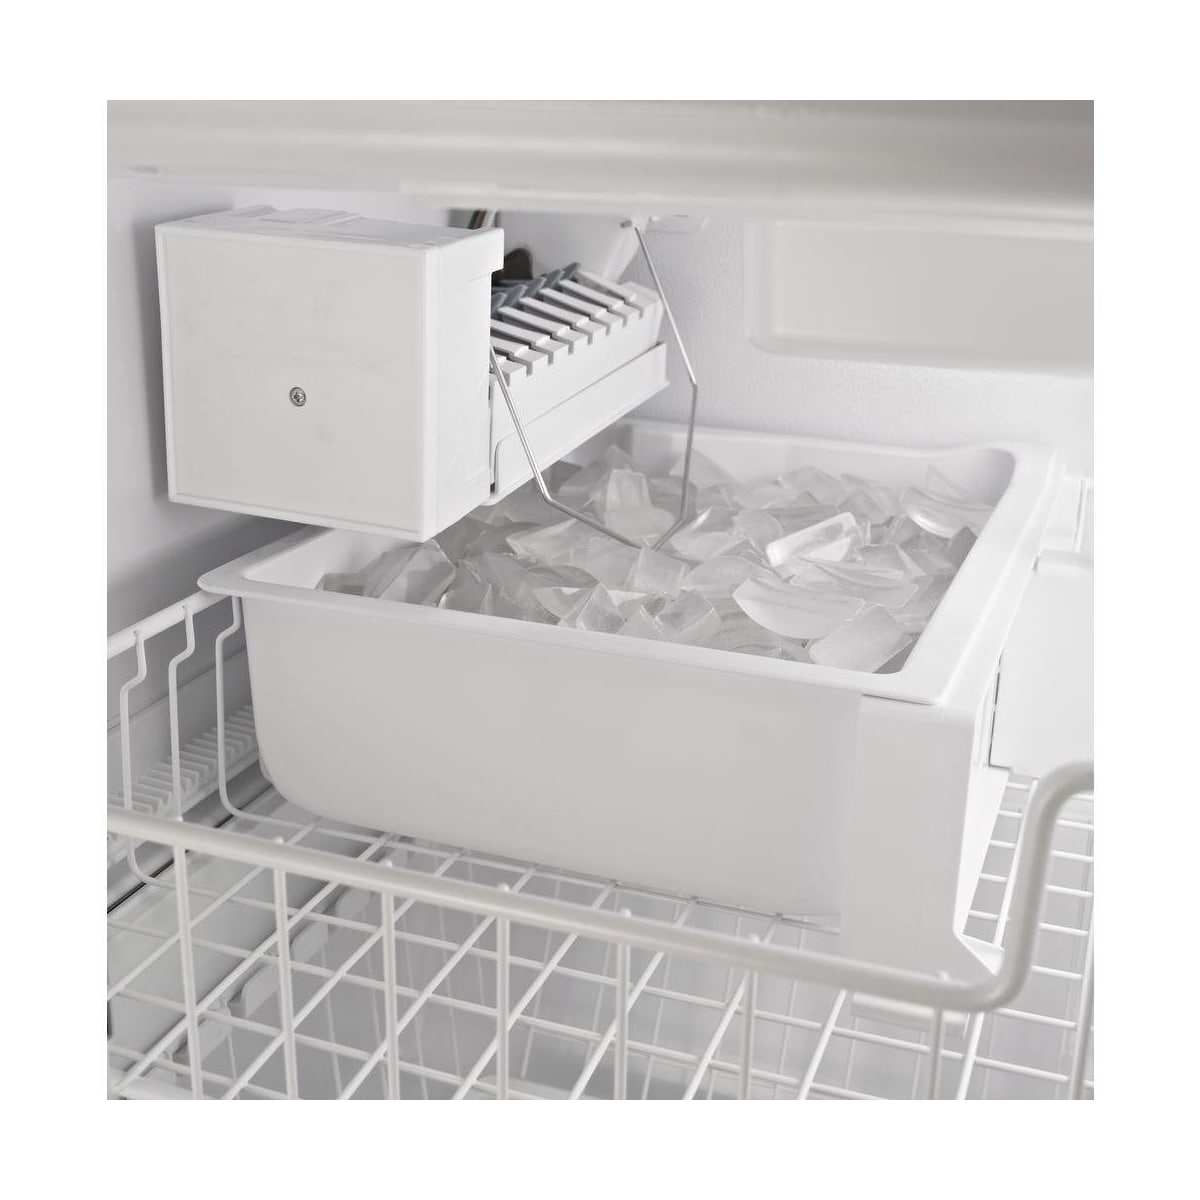 Maytag MBF2258FEZ Bottom-freezer Refrigerator review - Reviewed